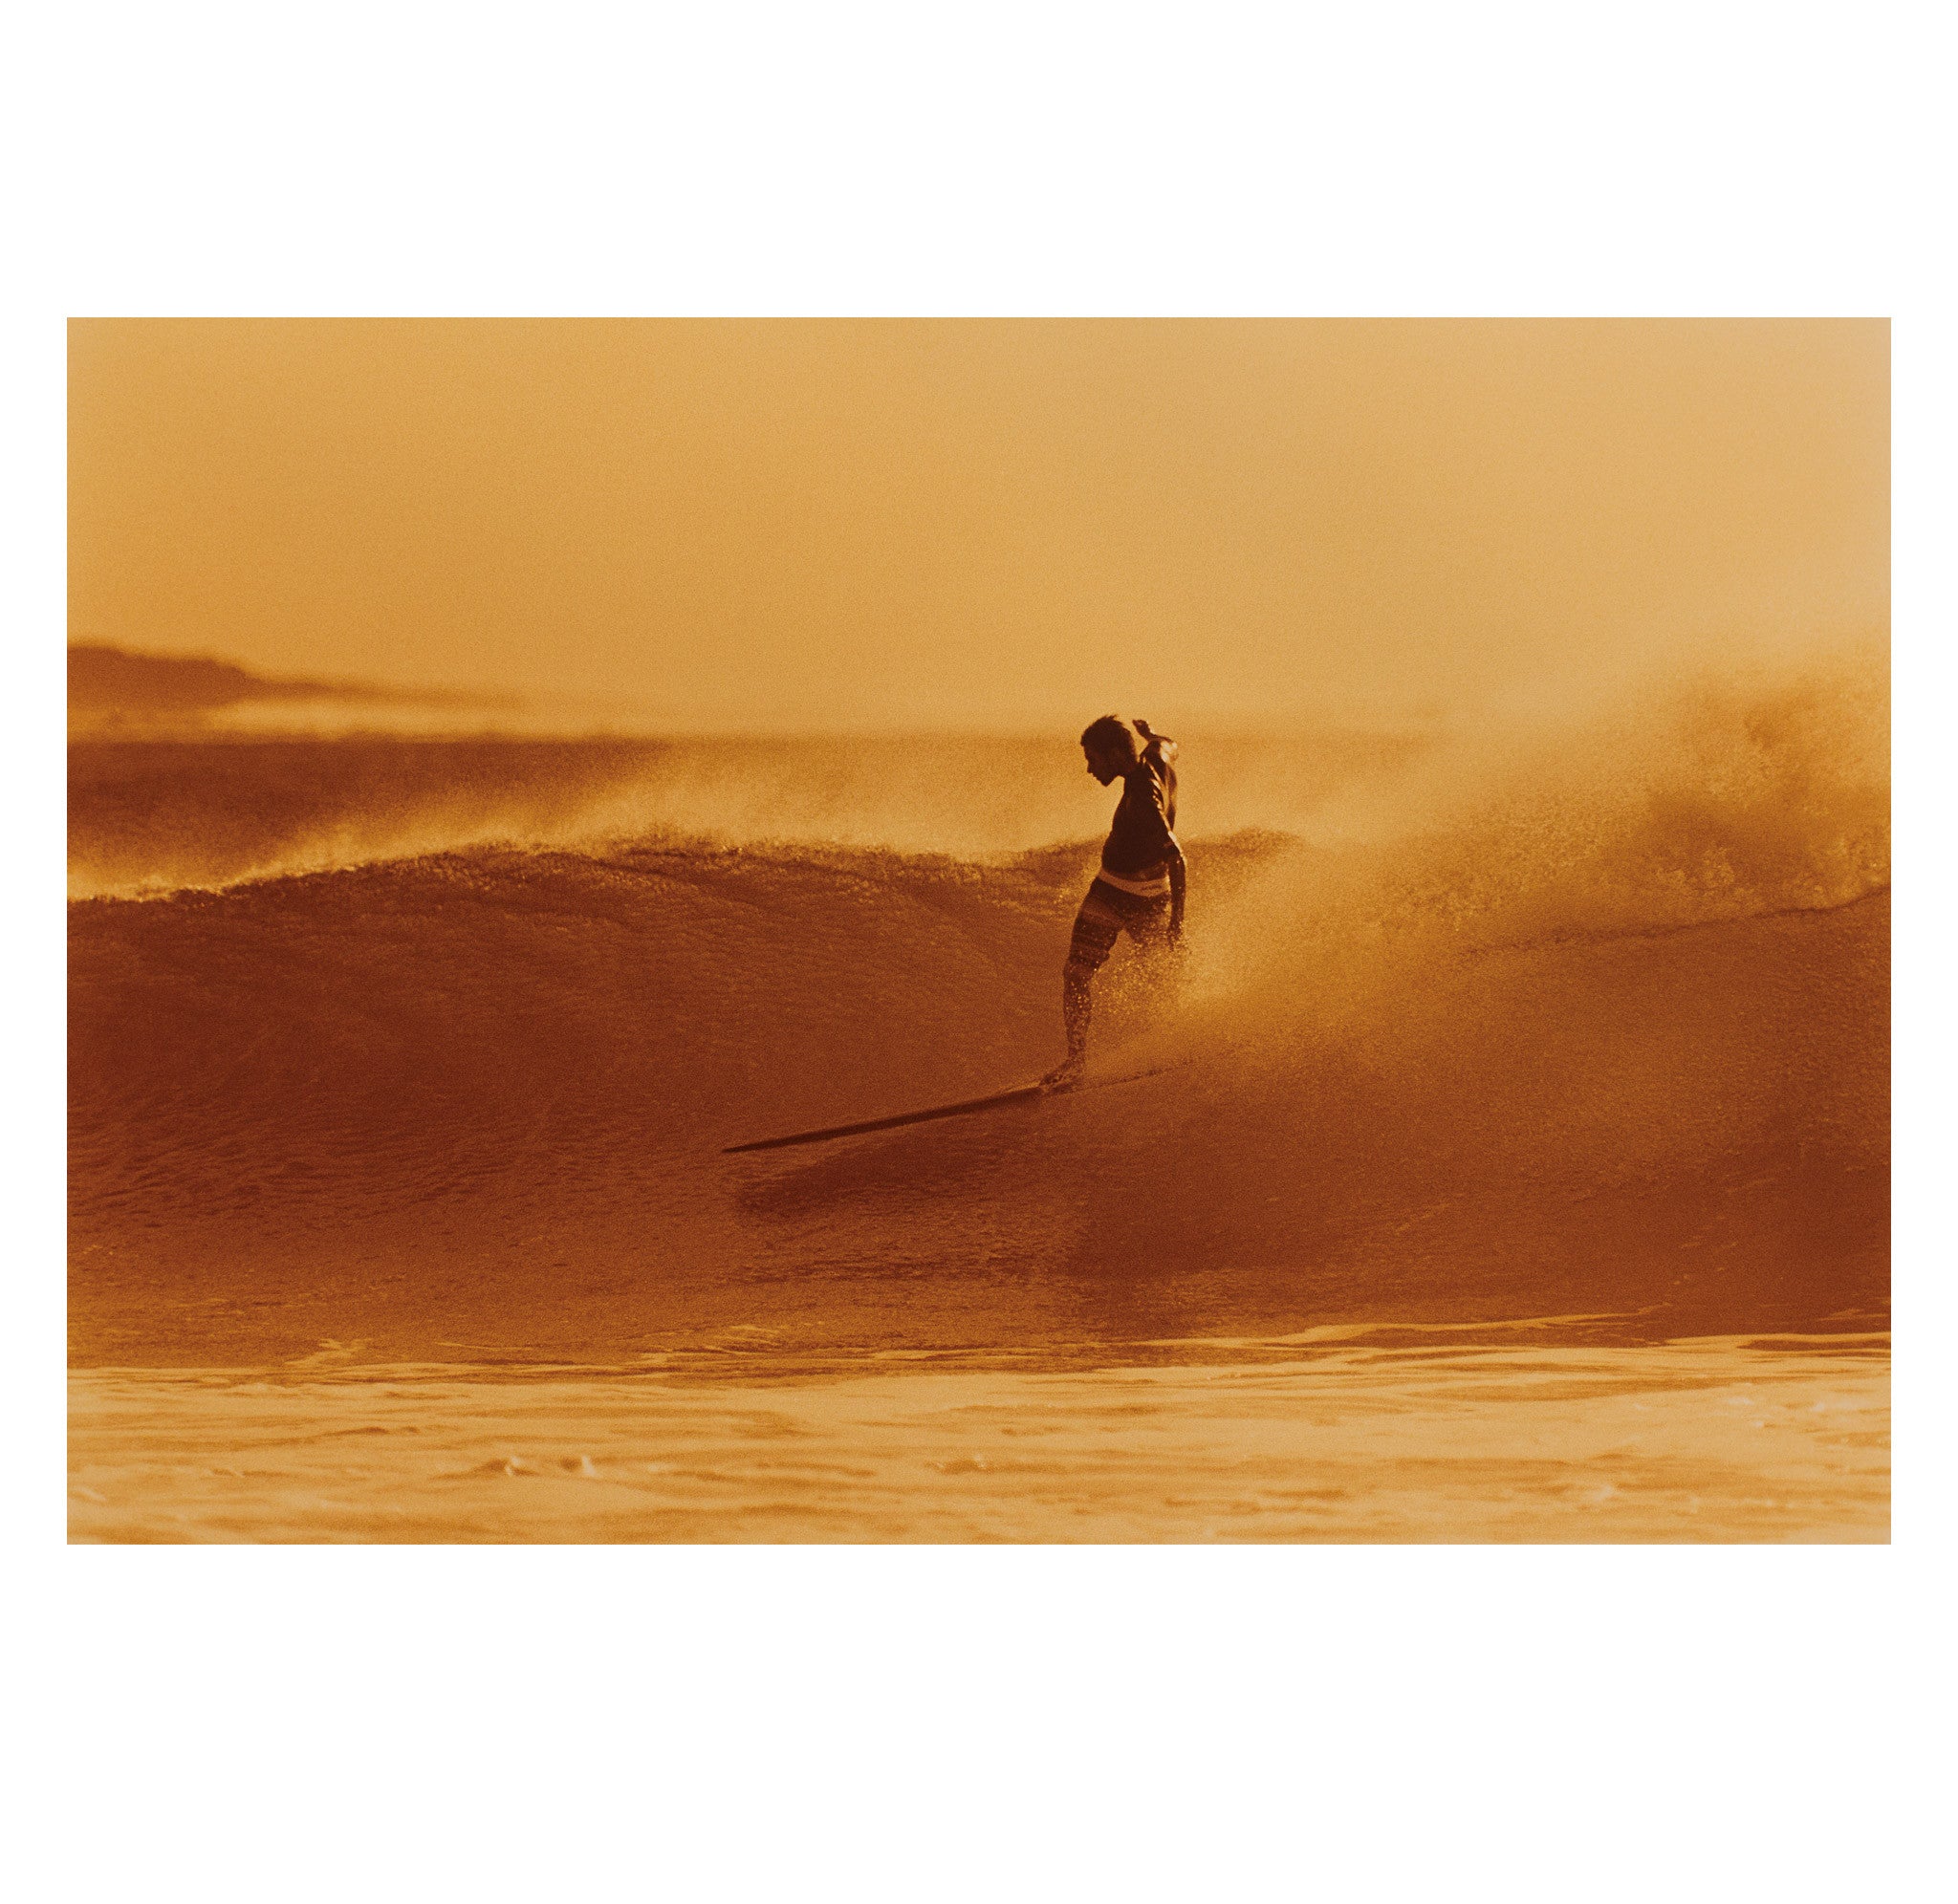 Thomas Campbell – Dave Rastovich, West Africa